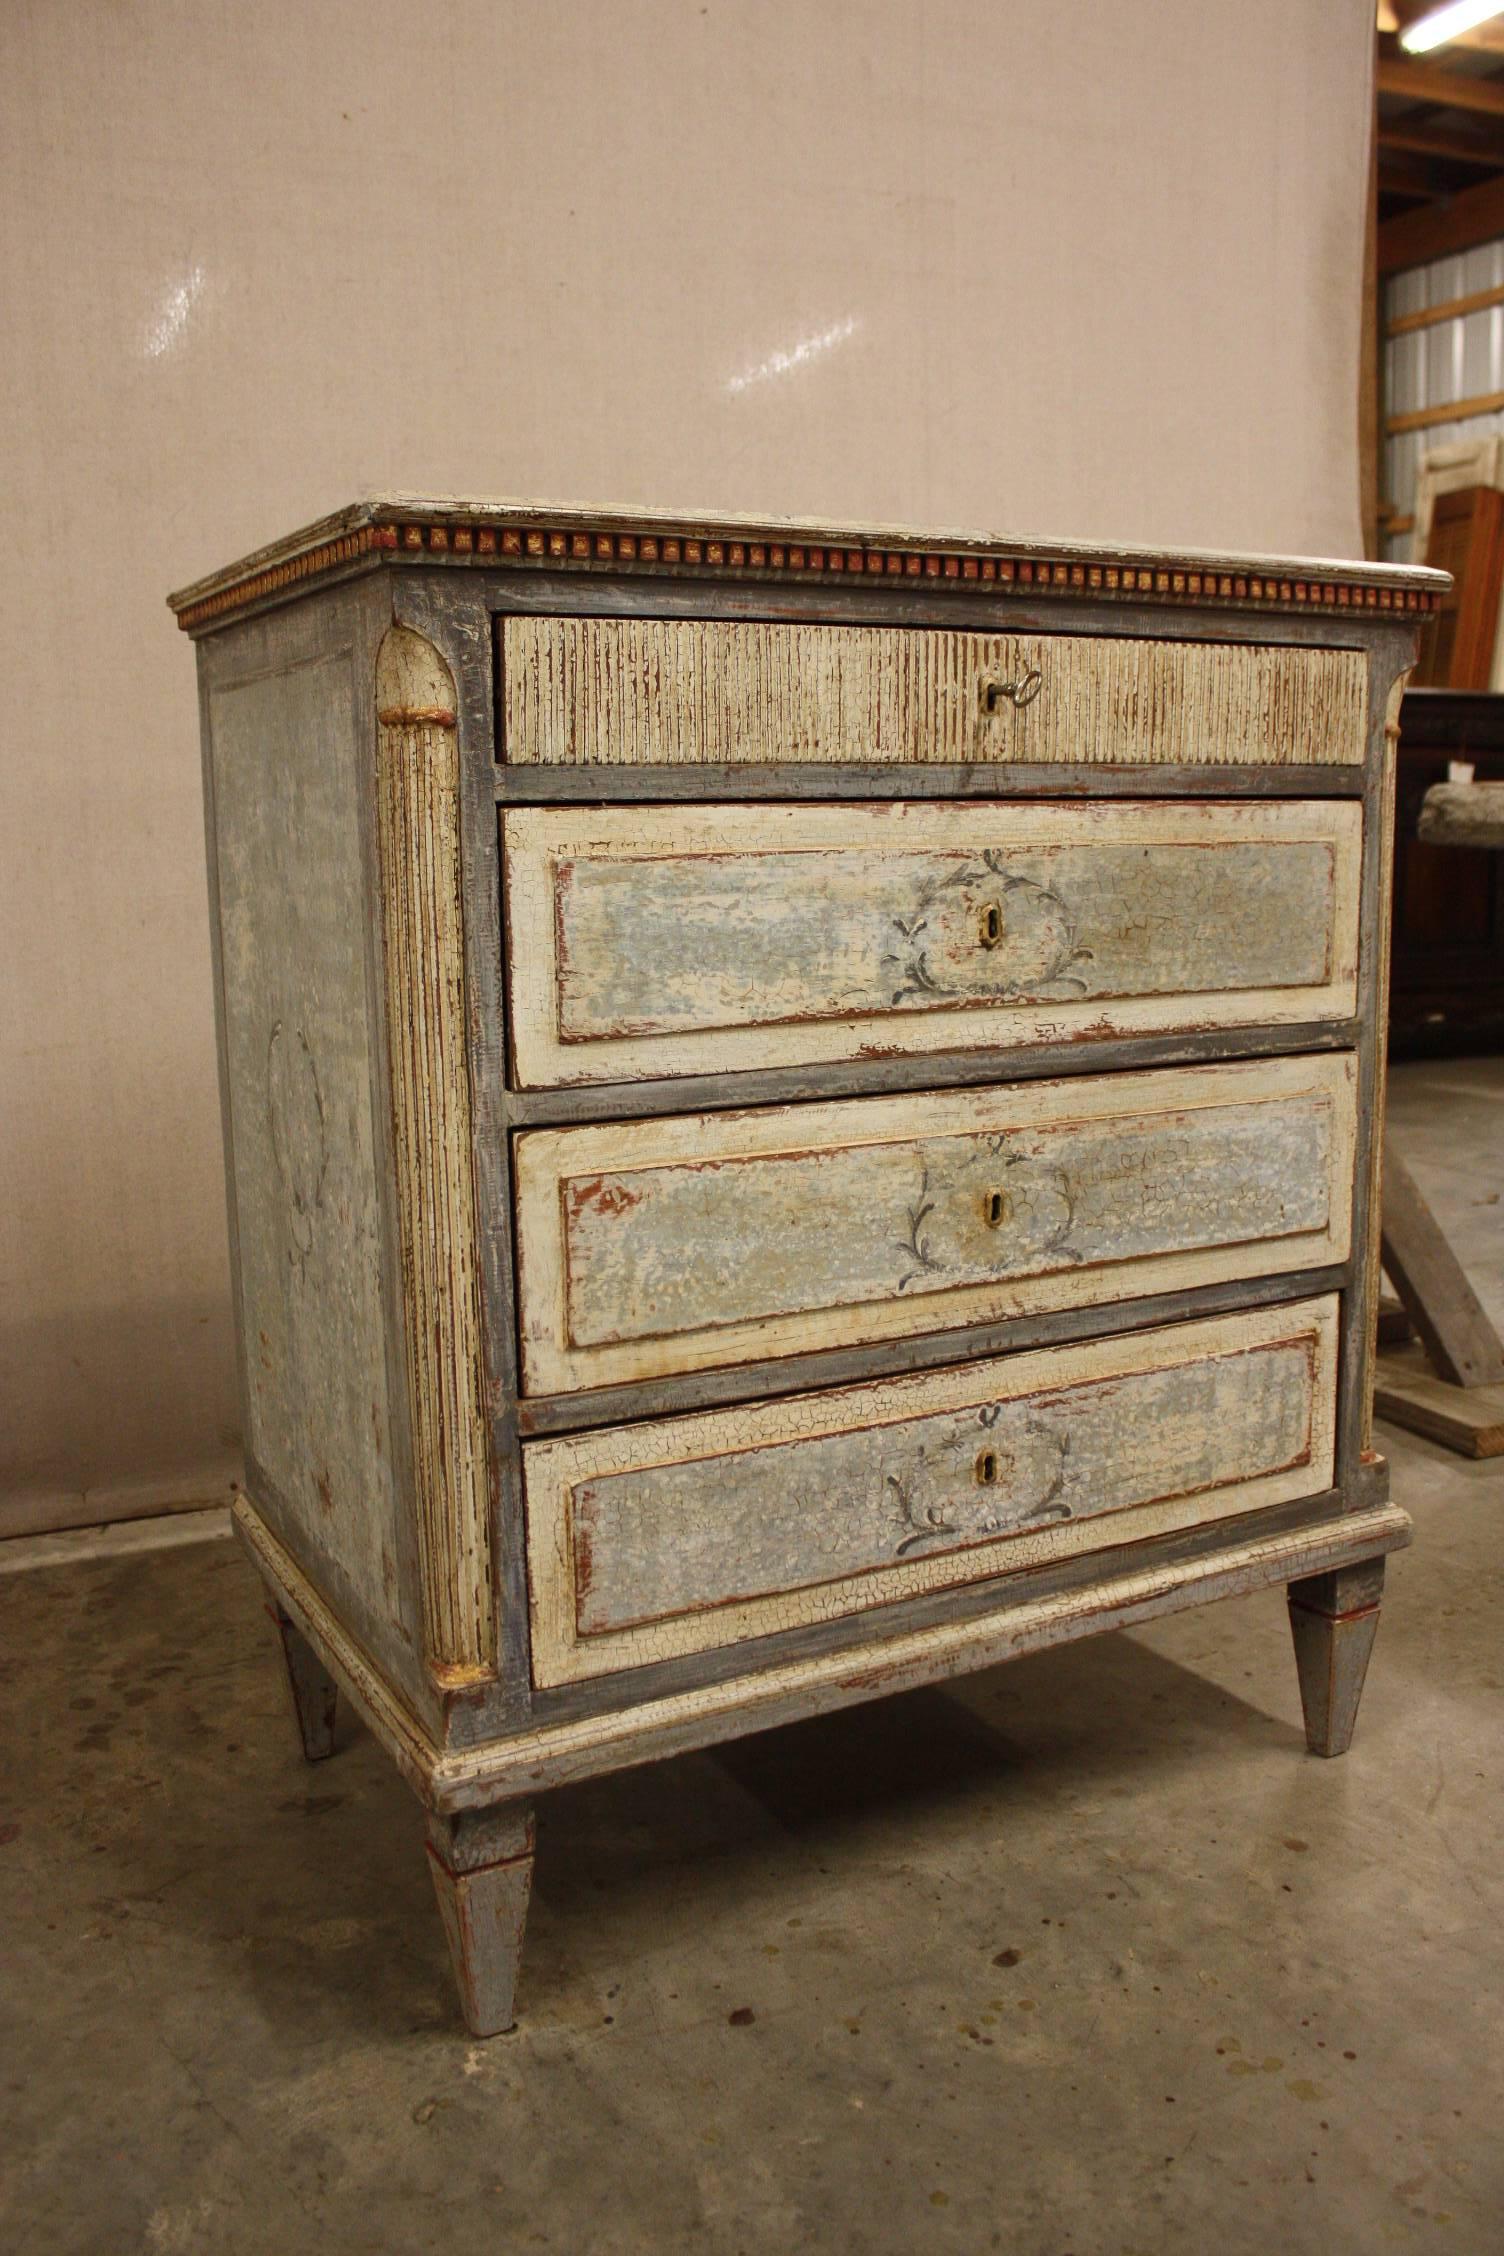 Small chest with four drawers, painted and has a dental molding around the top.